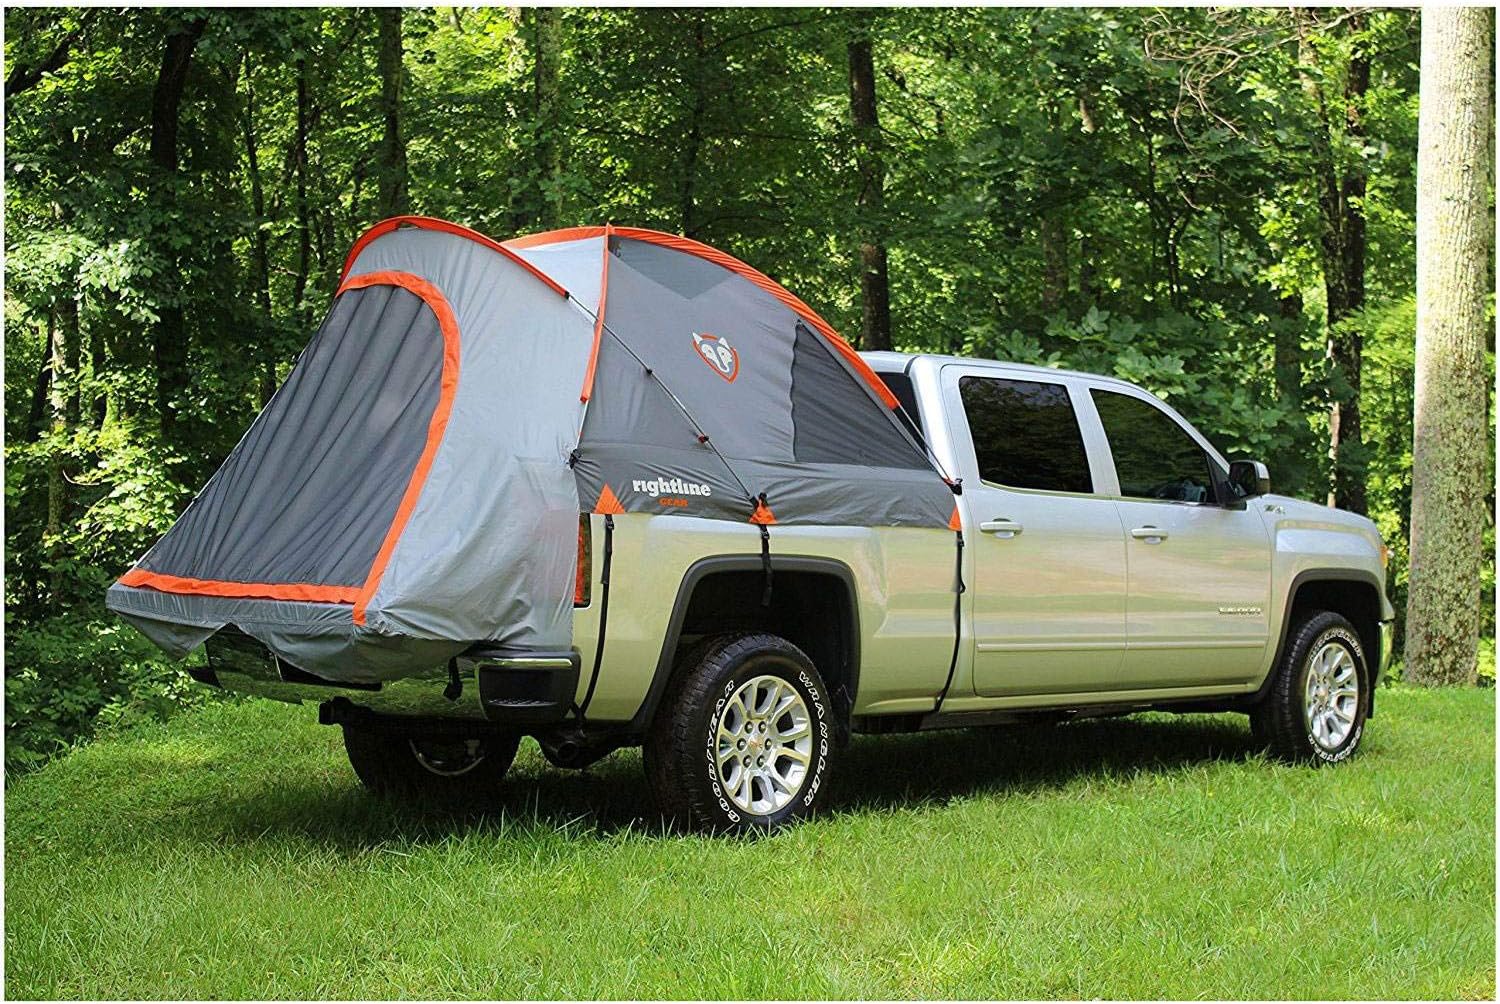 Rightline Gear Roof Truck Tent